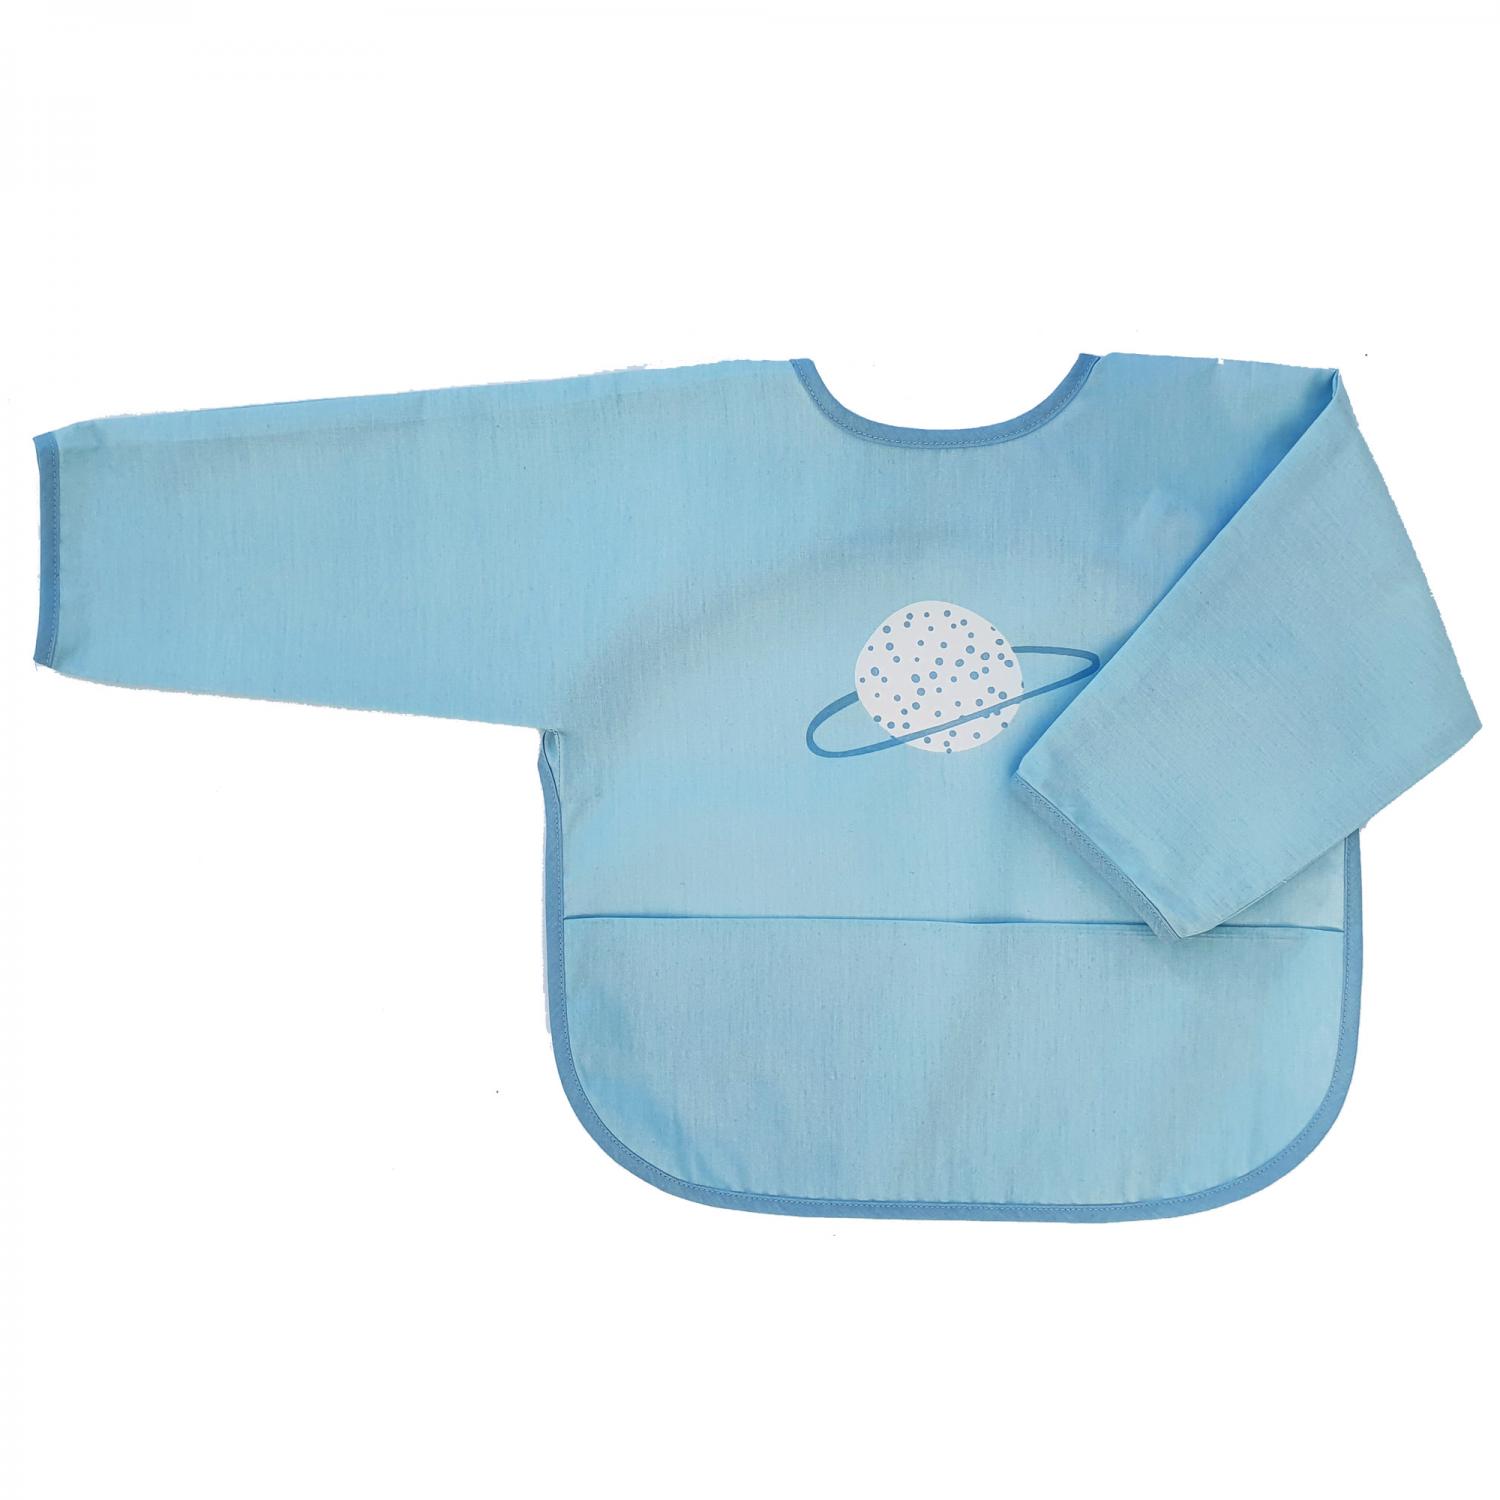 Bib with sleeves blue planet eco